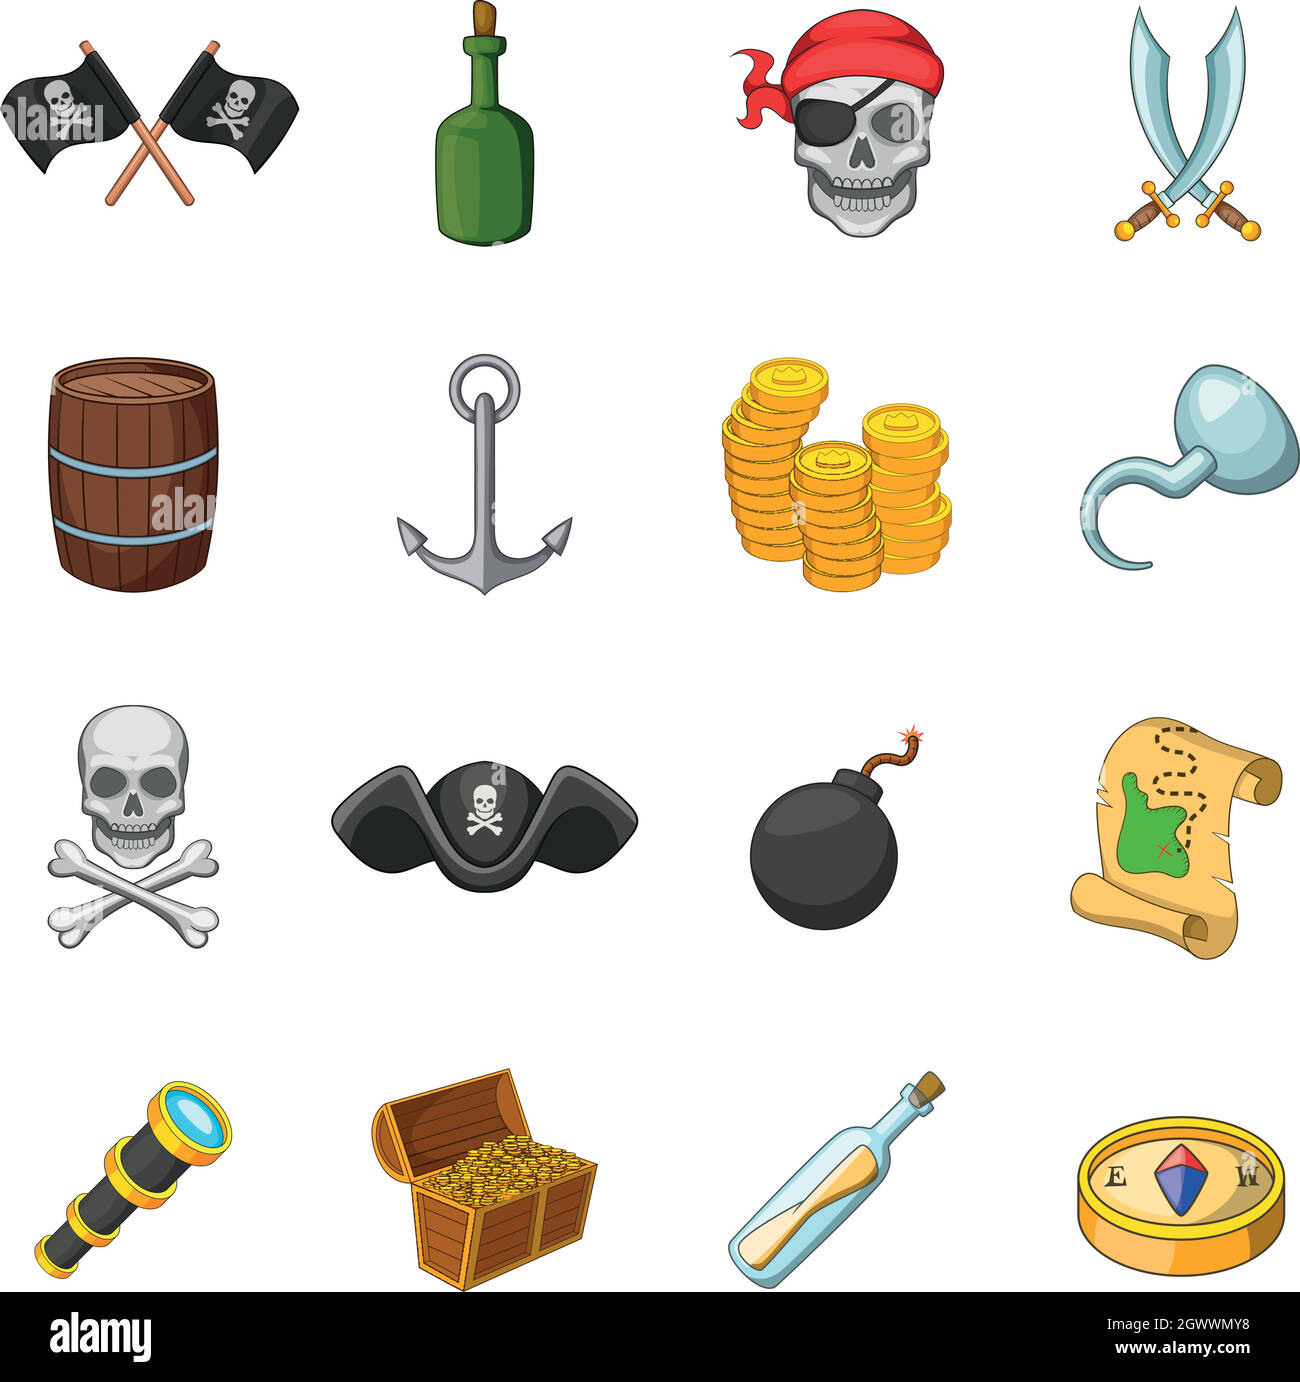 Pirate props Stock Vector Images - Alamy